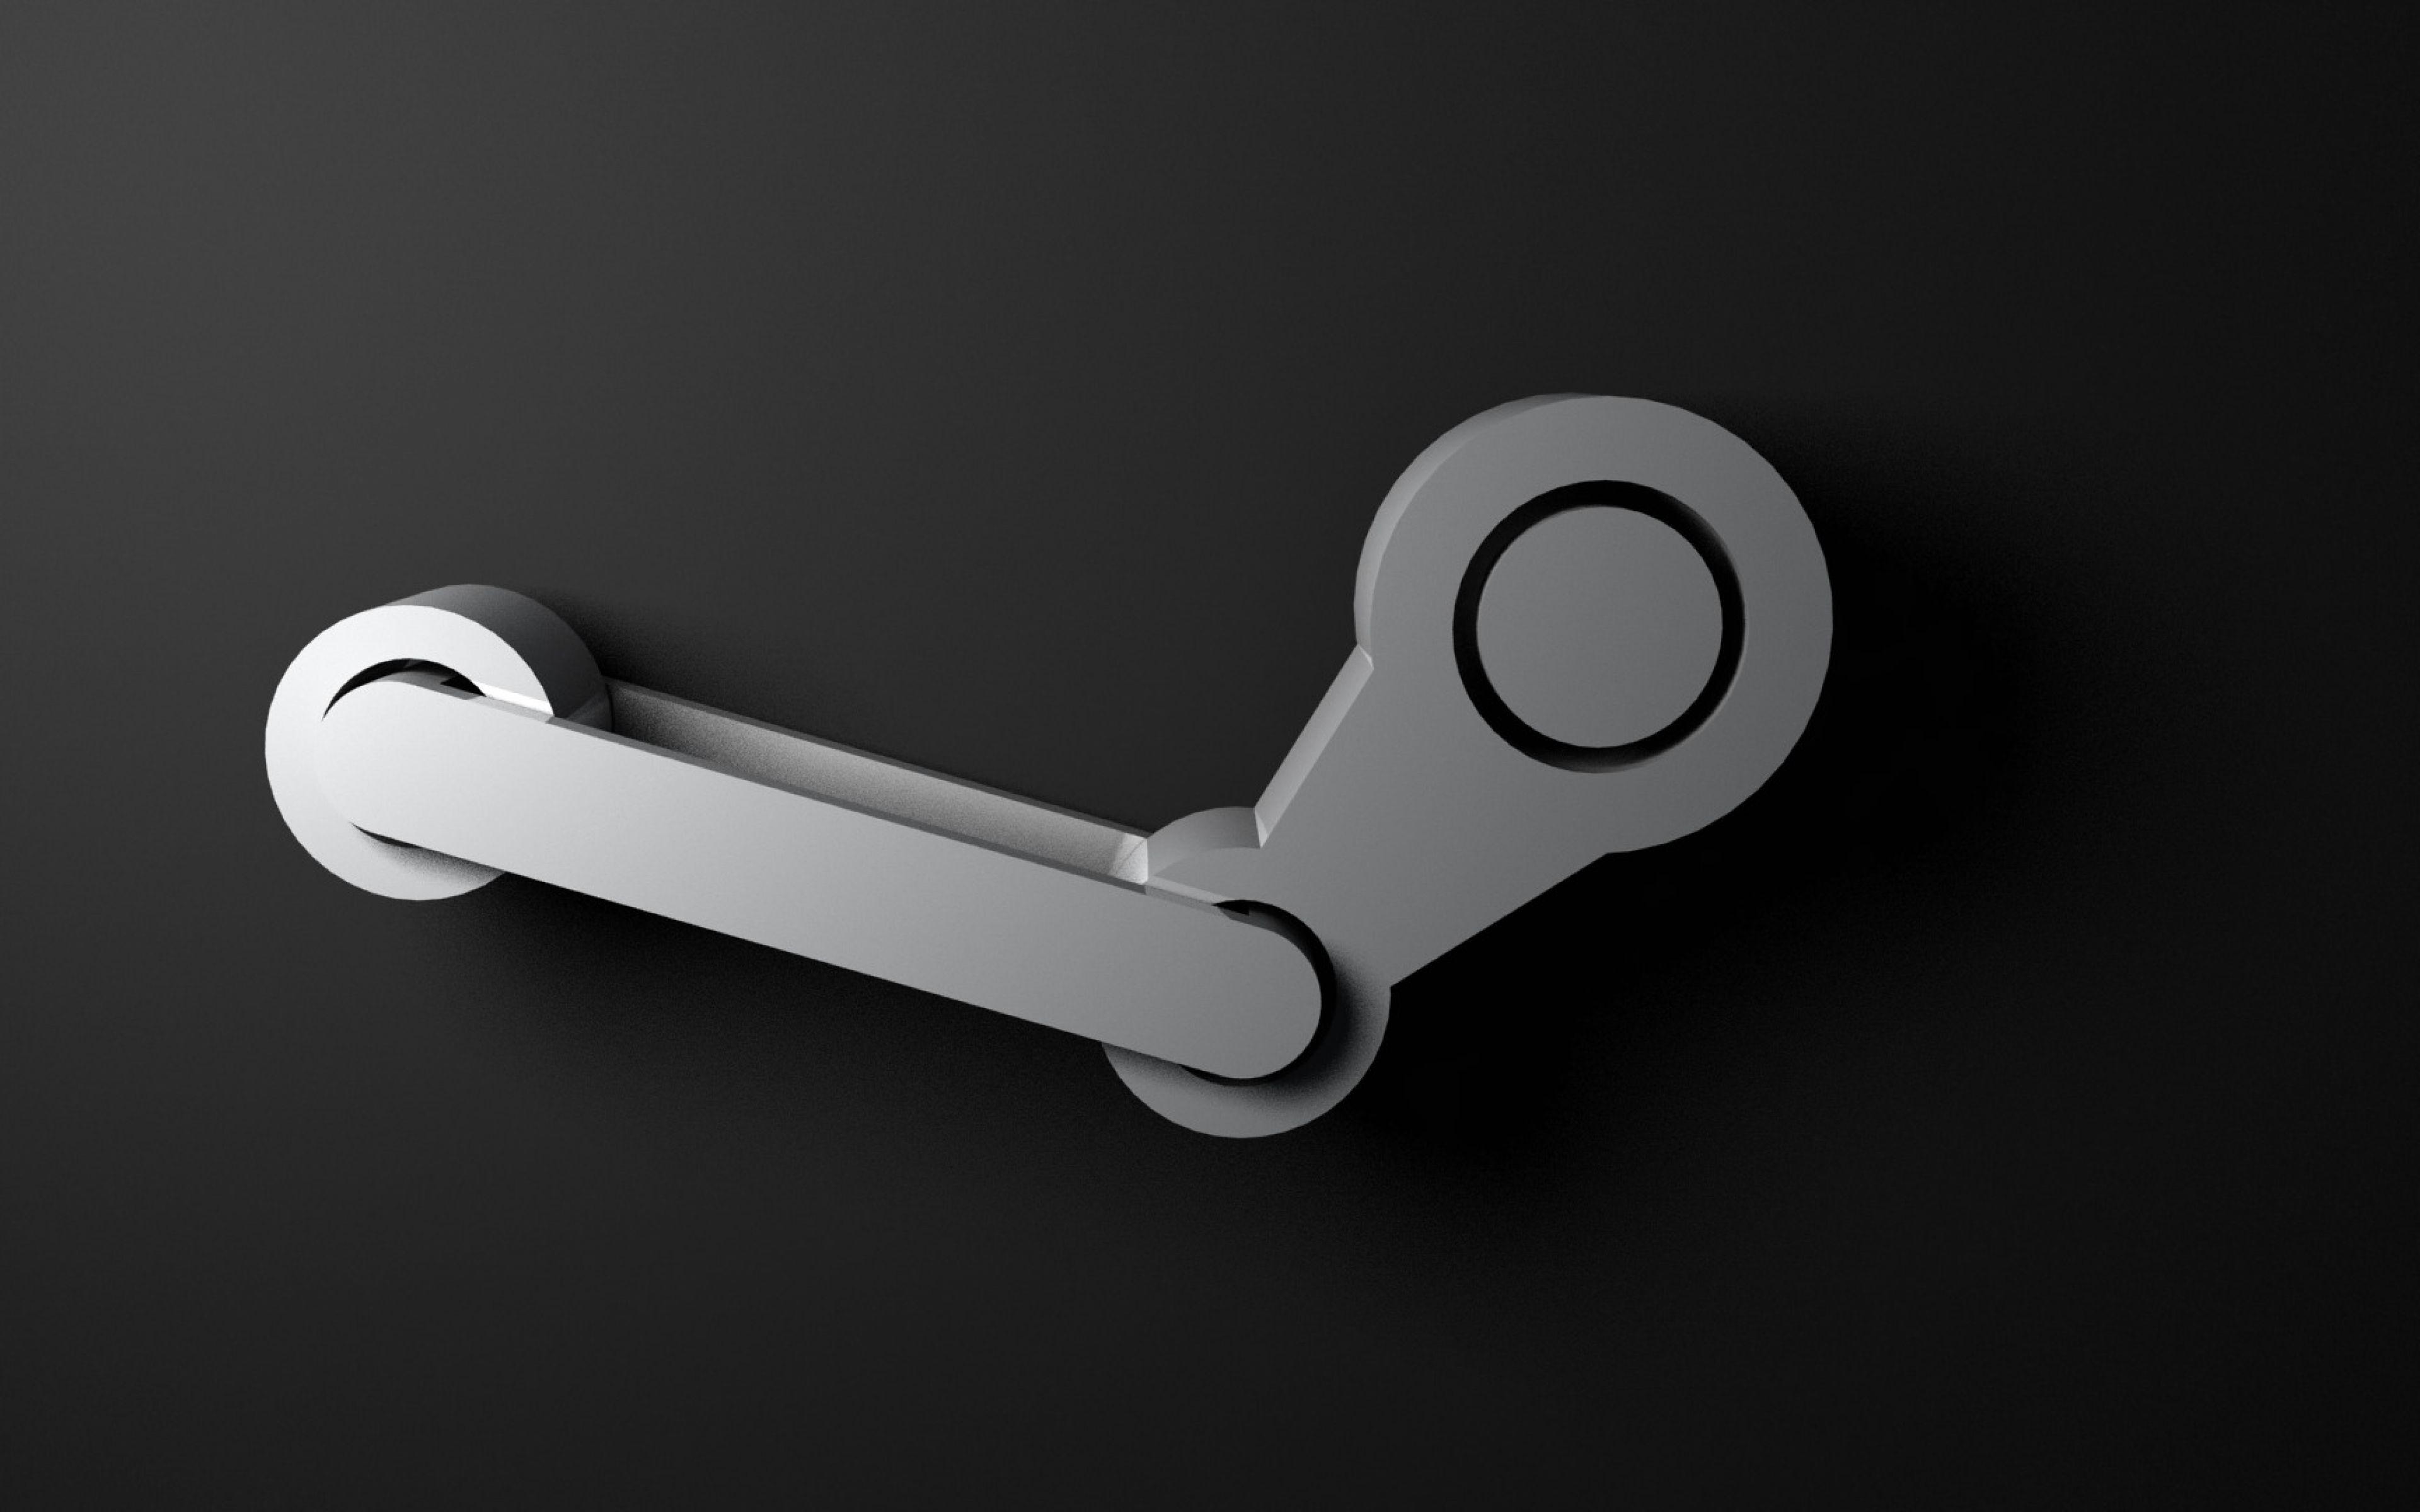 Steam Background Images, HD Pictures and Wallpaper For Free Download